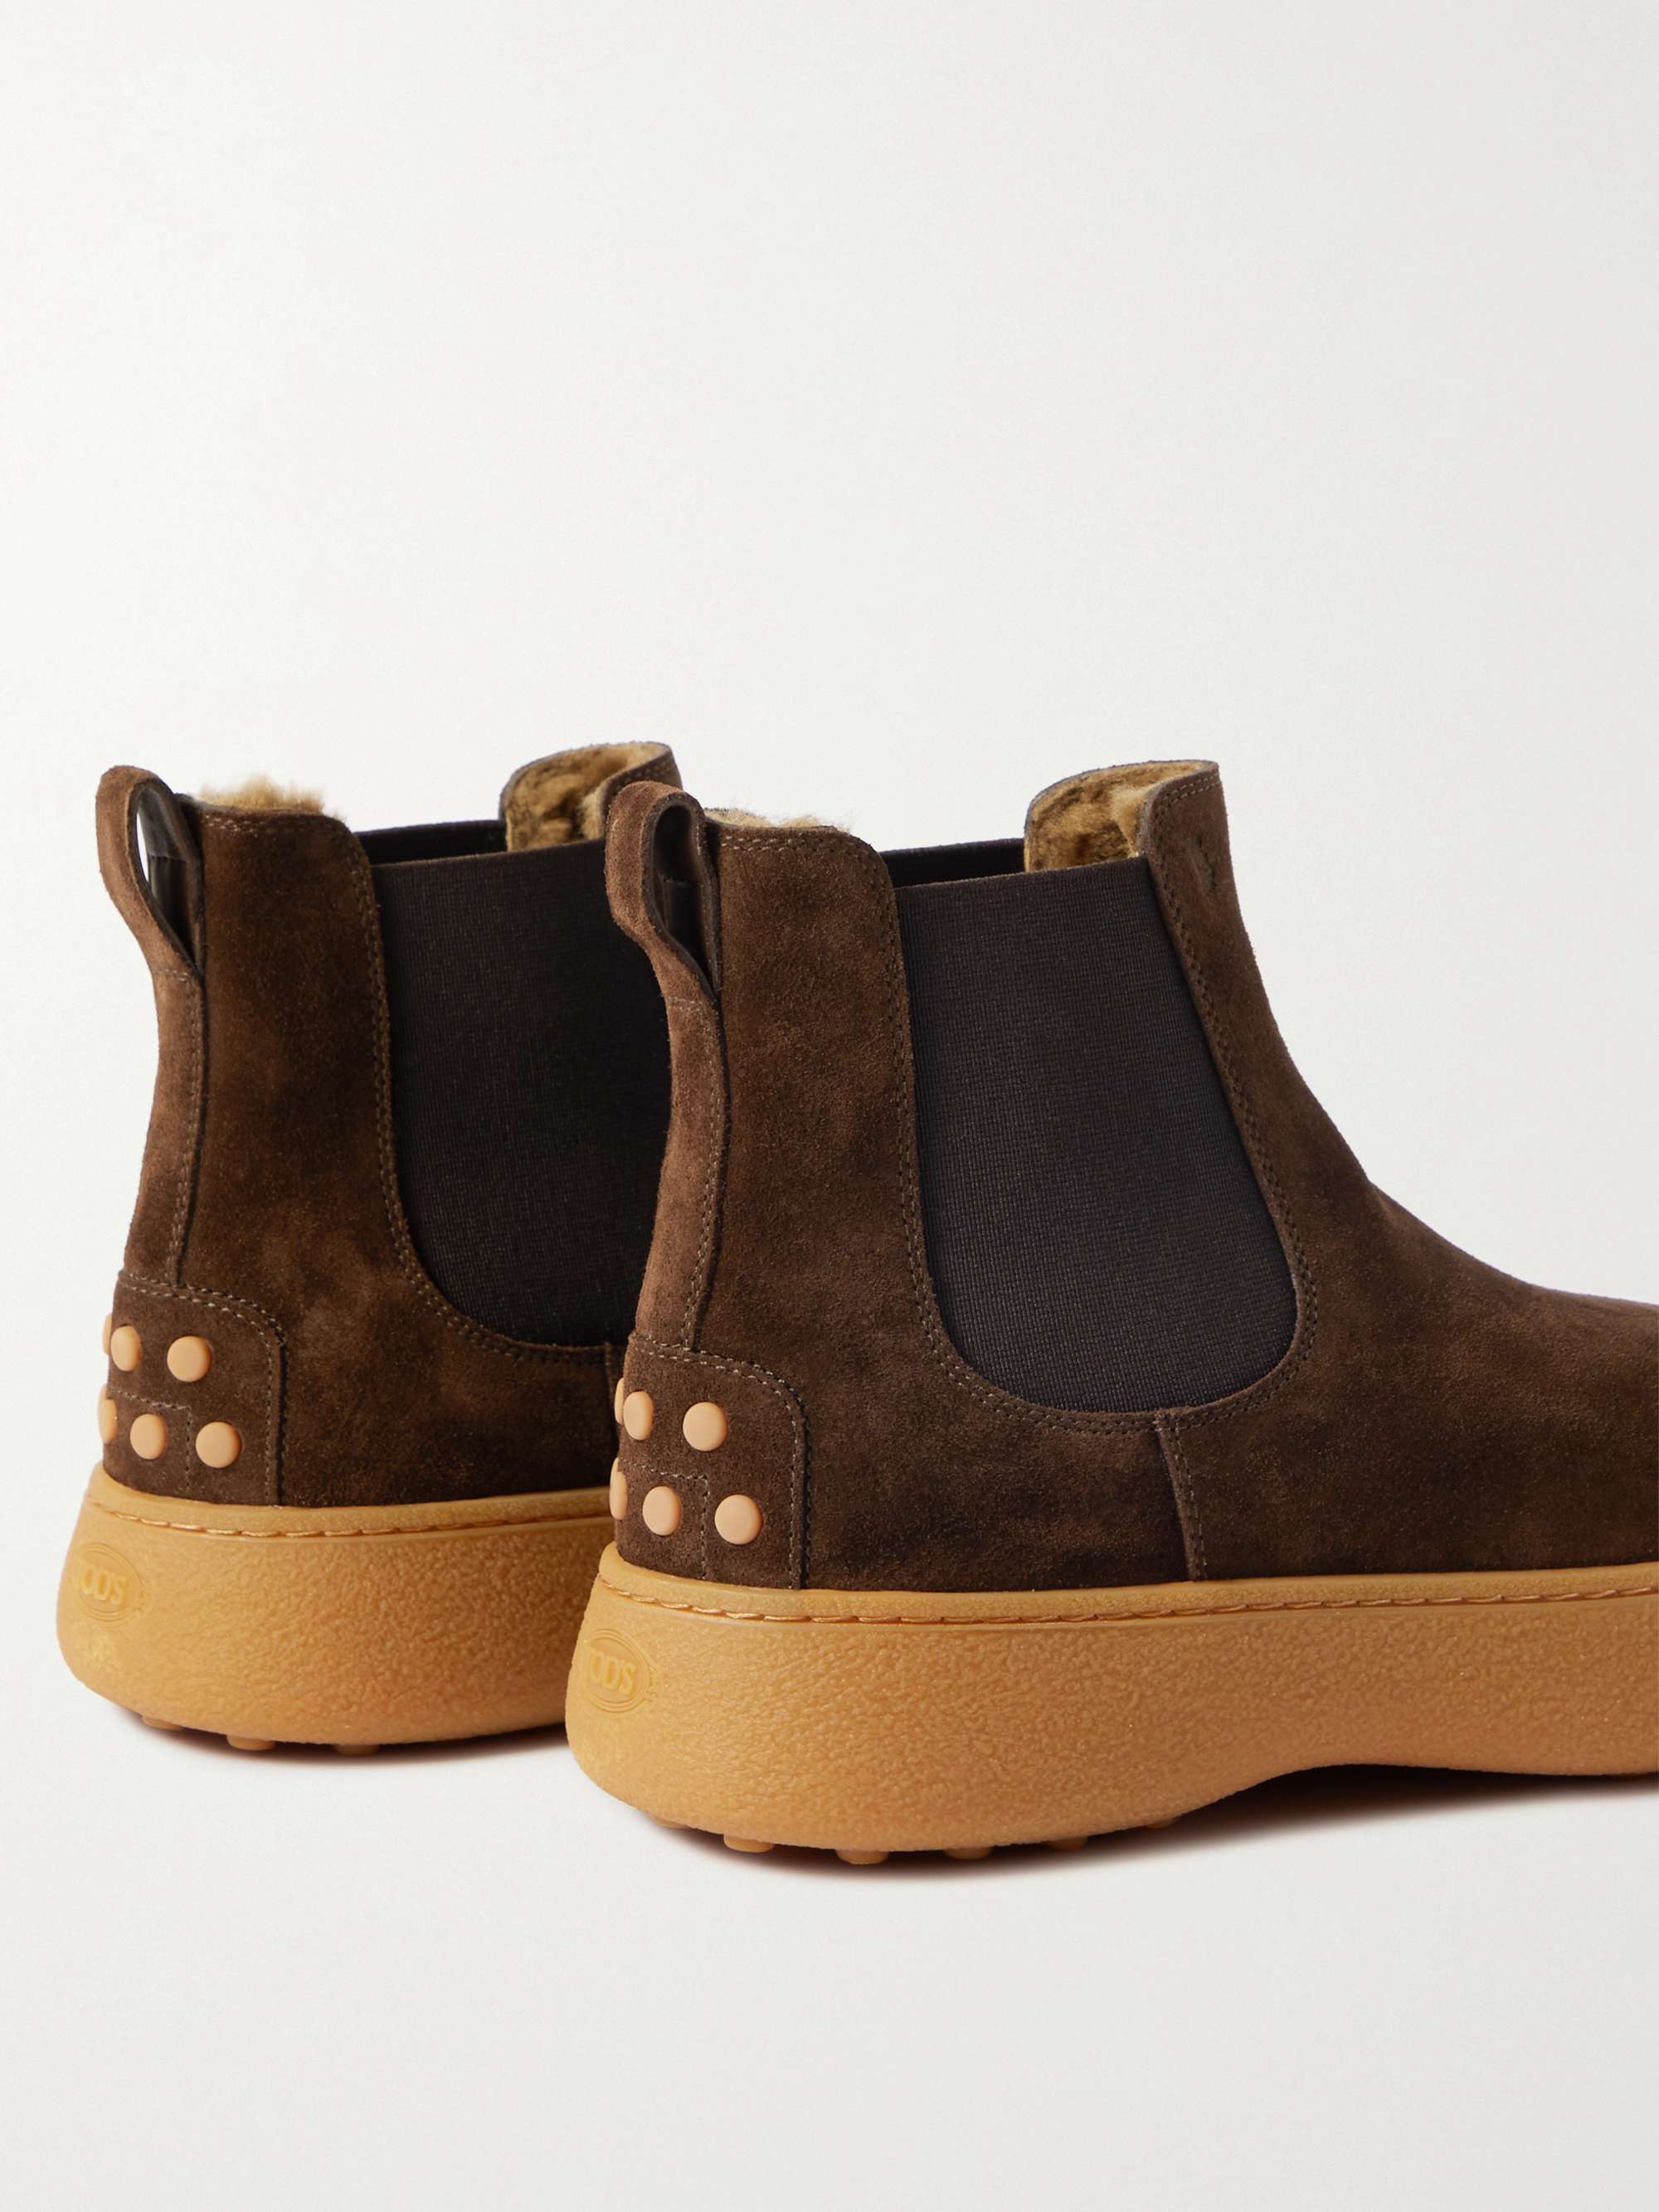 TOD'S Shearling-Lined Suede Chelsea Boots